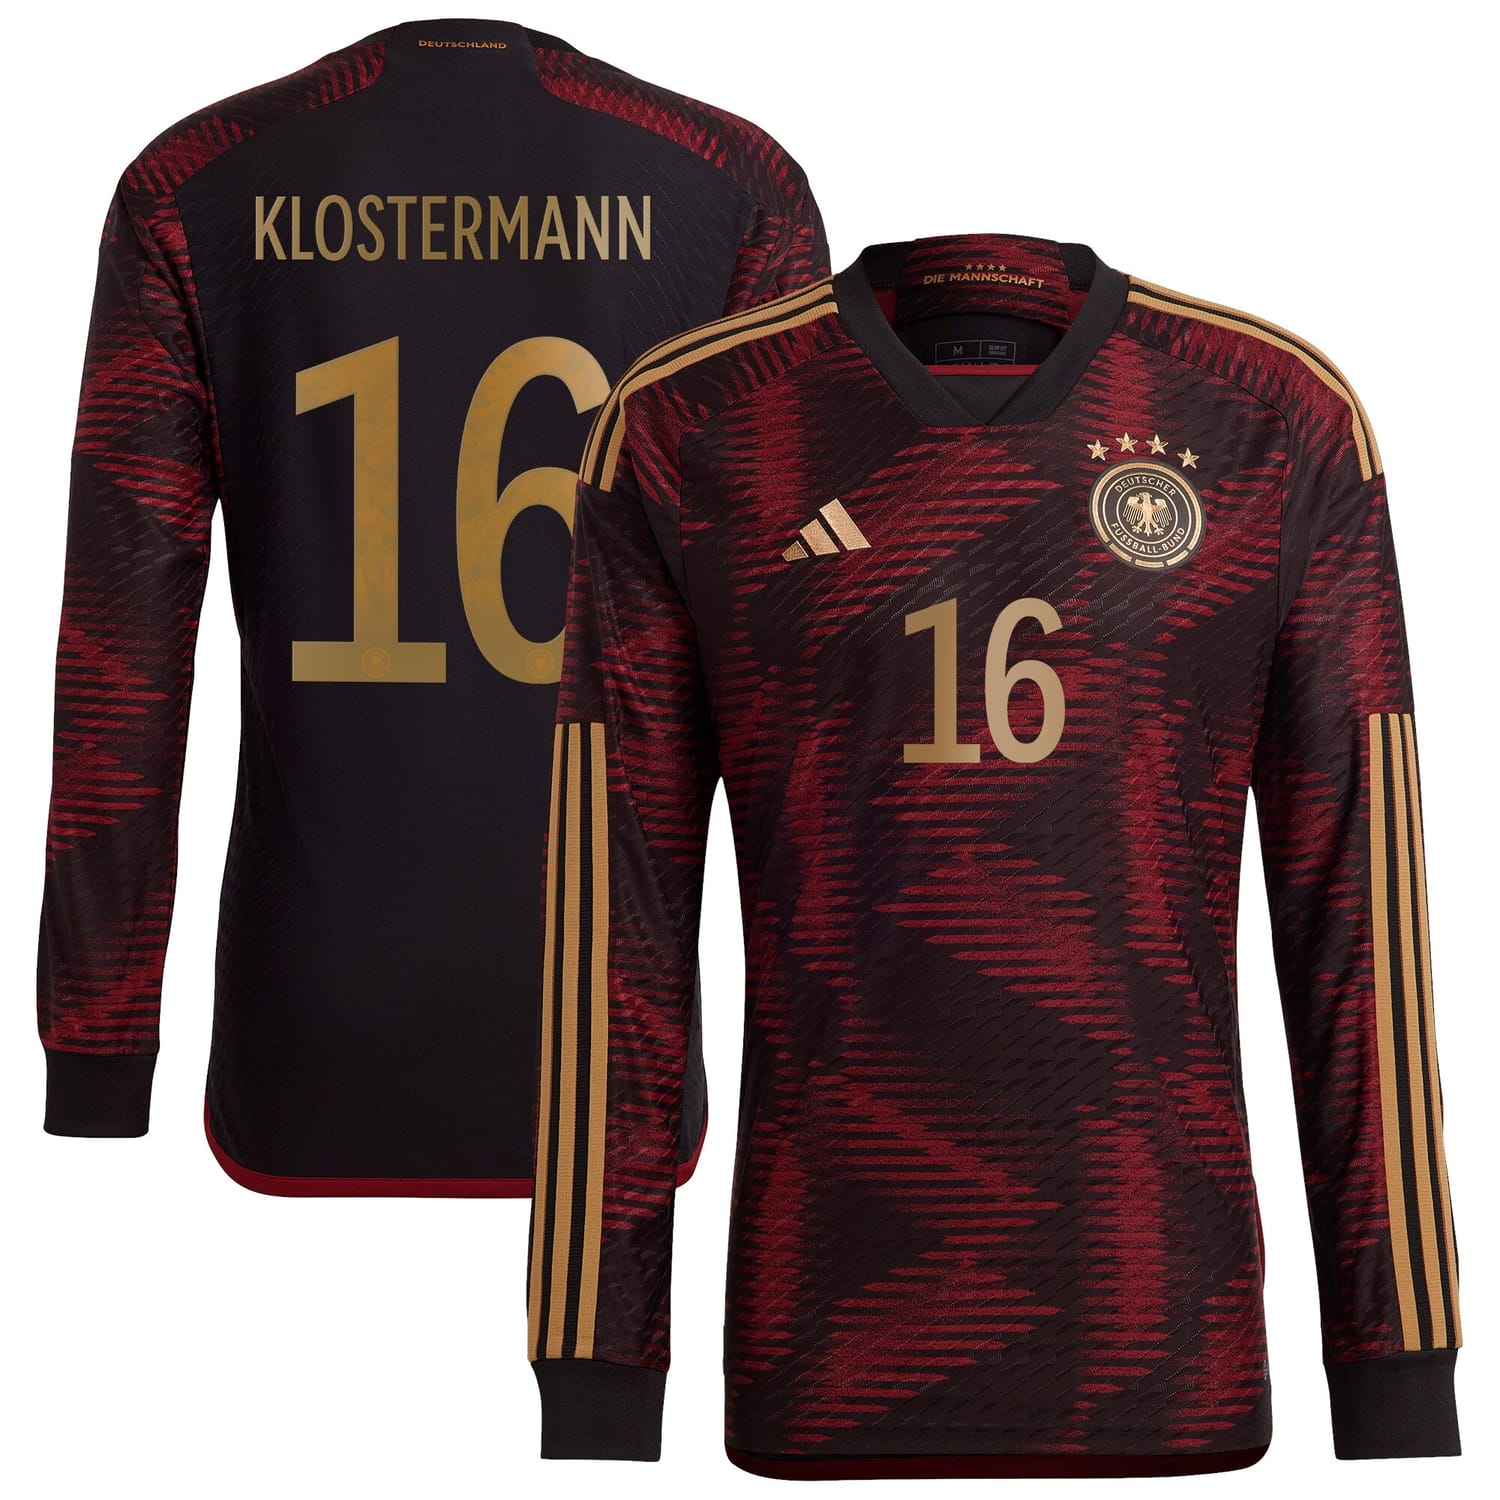 Germany National Team Away Authentic Jersey Shirt Long Sleeve player Lukas Klostermann 16 printing for Men